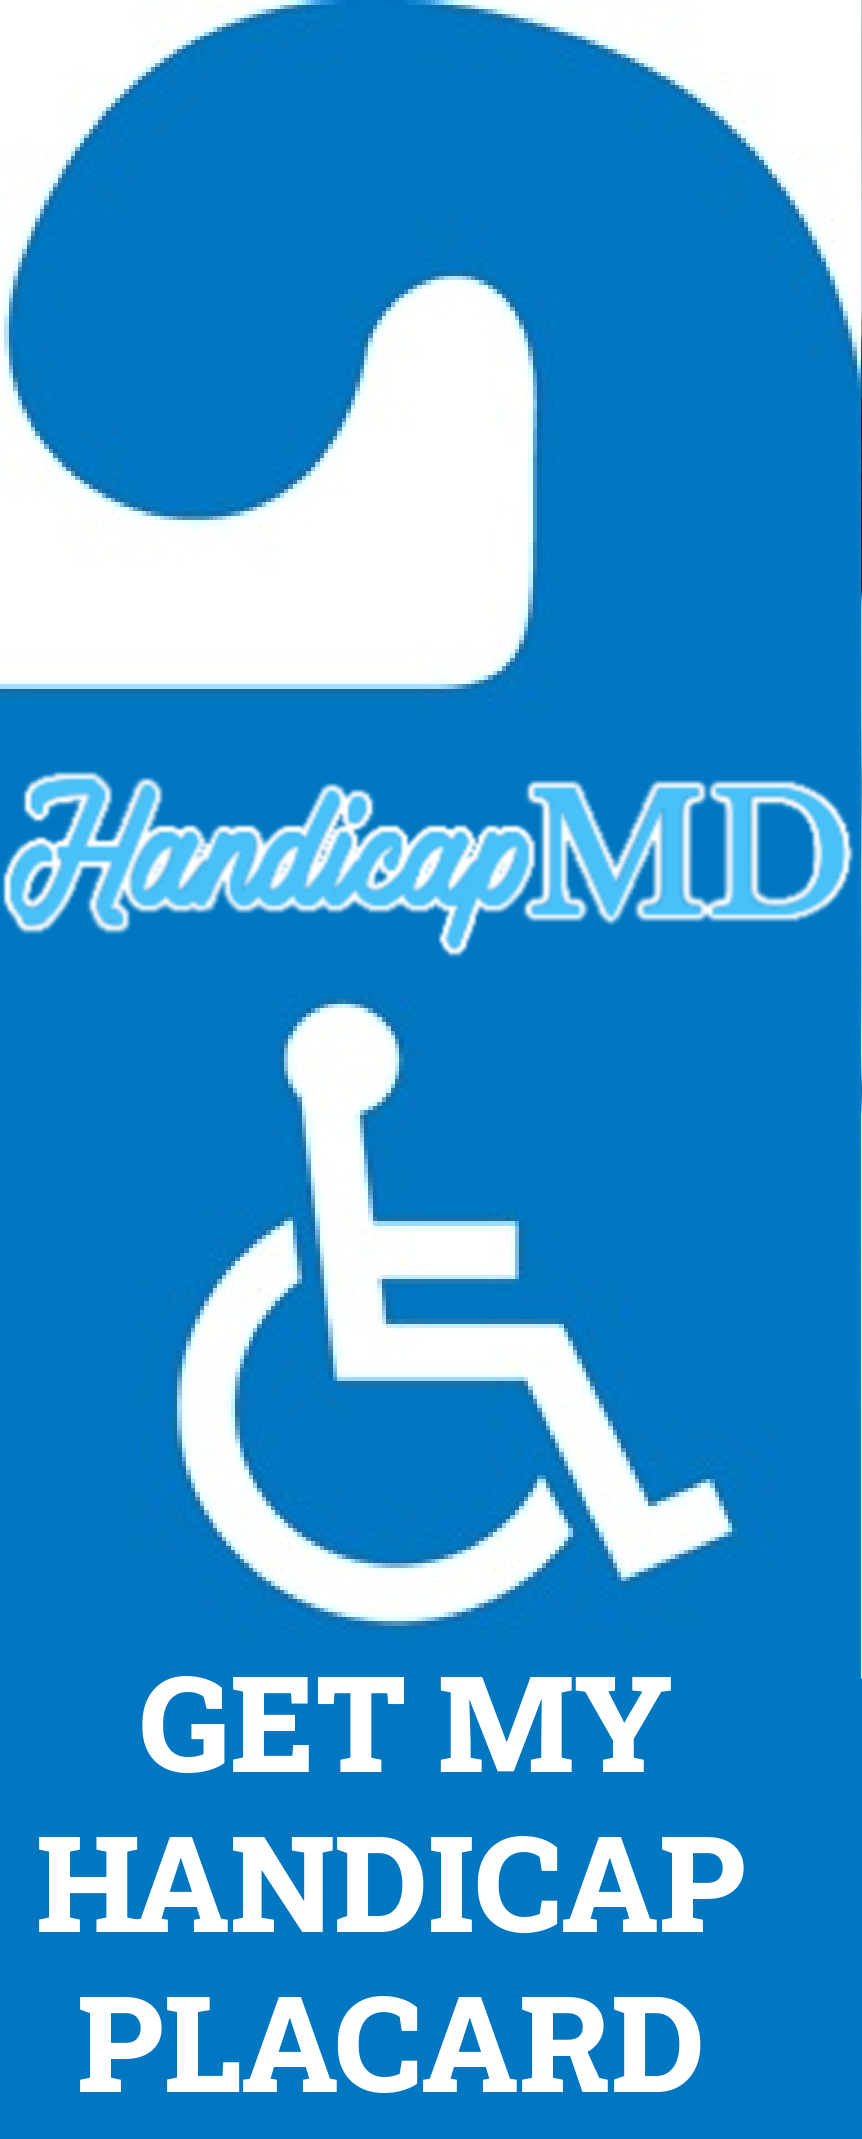 Why Using Telemedicine To Apply For A Disabled Parking Permit Makes Sense